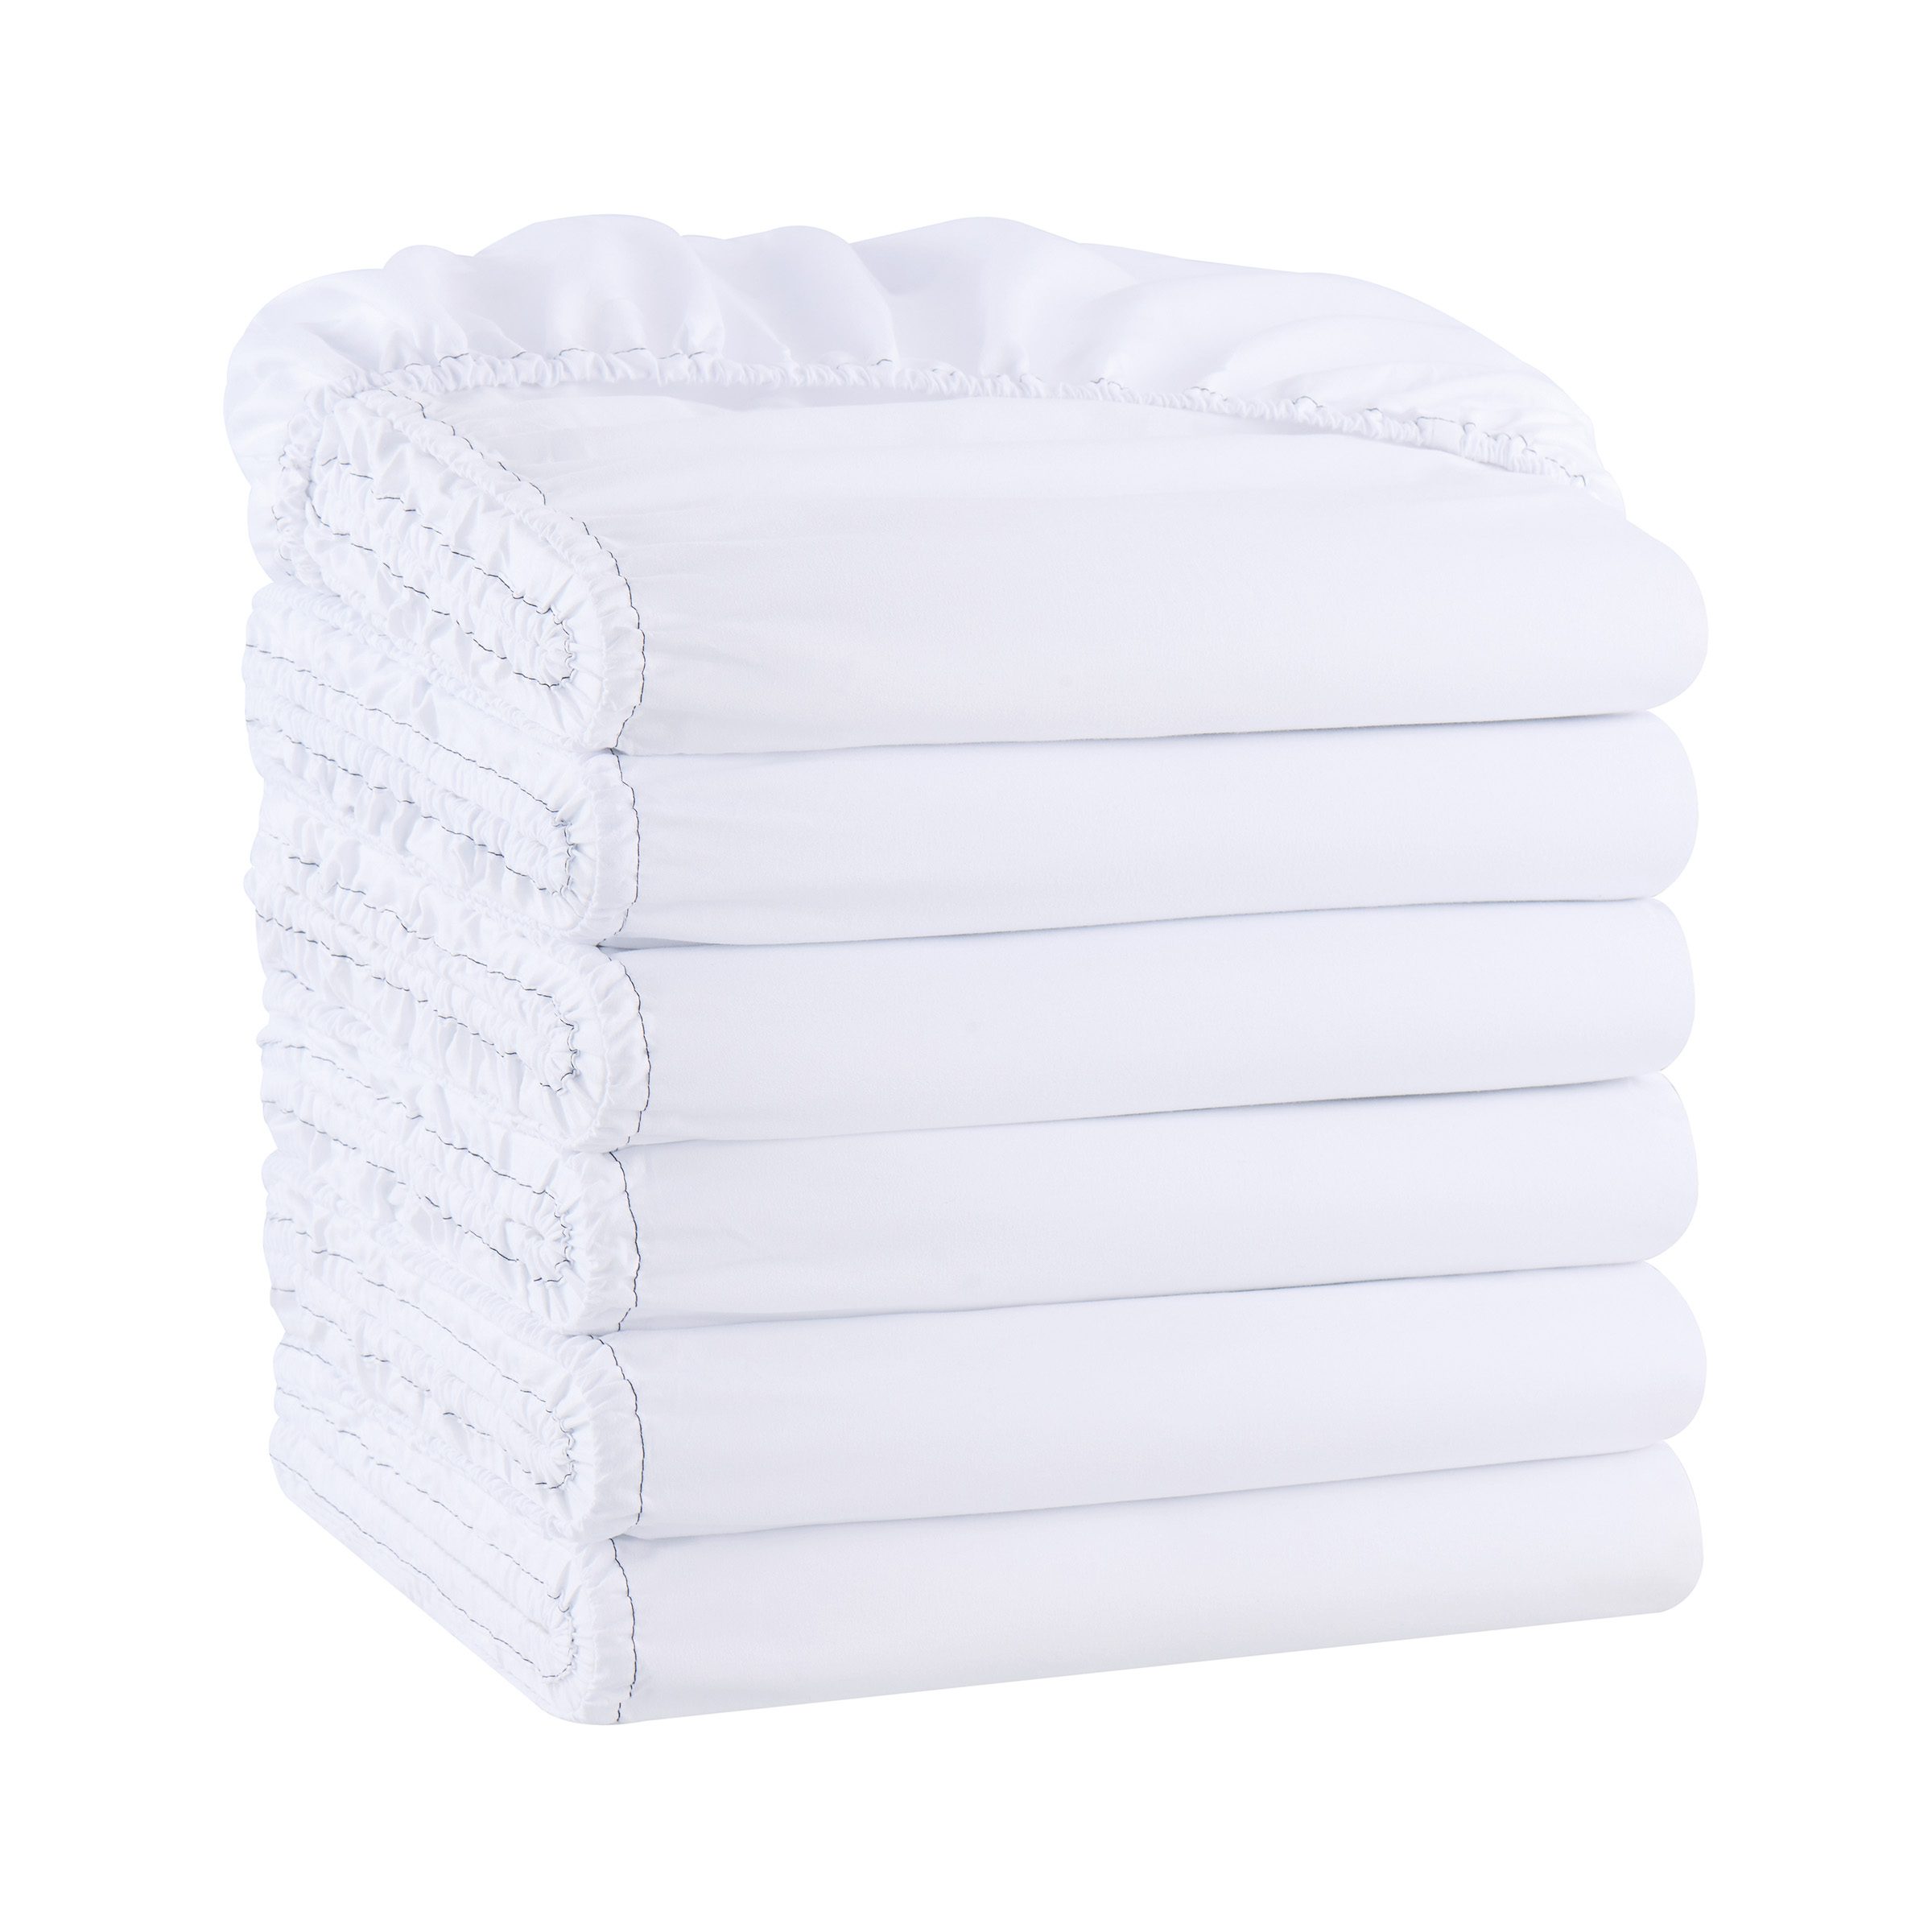 Arkwright Bulk Fitted Bed Sheets - Soft Poly/Cotton Sheet for Home - Twin  Size - (6 Pack) White 